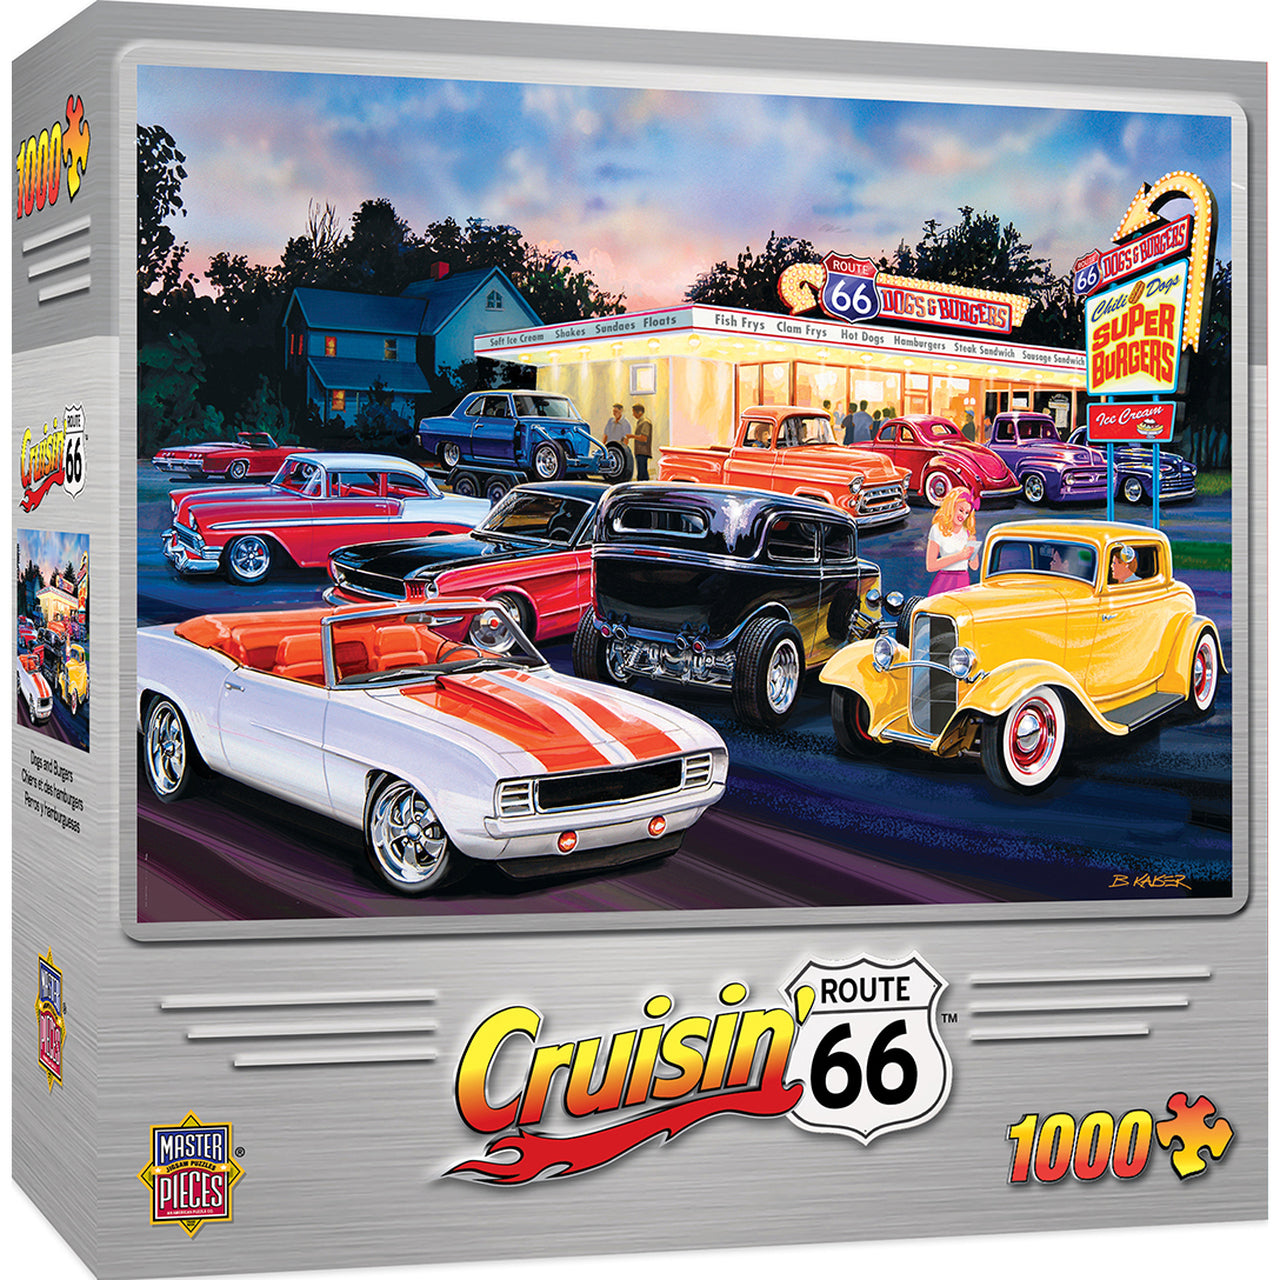 Cruisin' Route 66 - Dogs & Burgers 1000 Piece Jigsaw Puzzle by MasterPieces